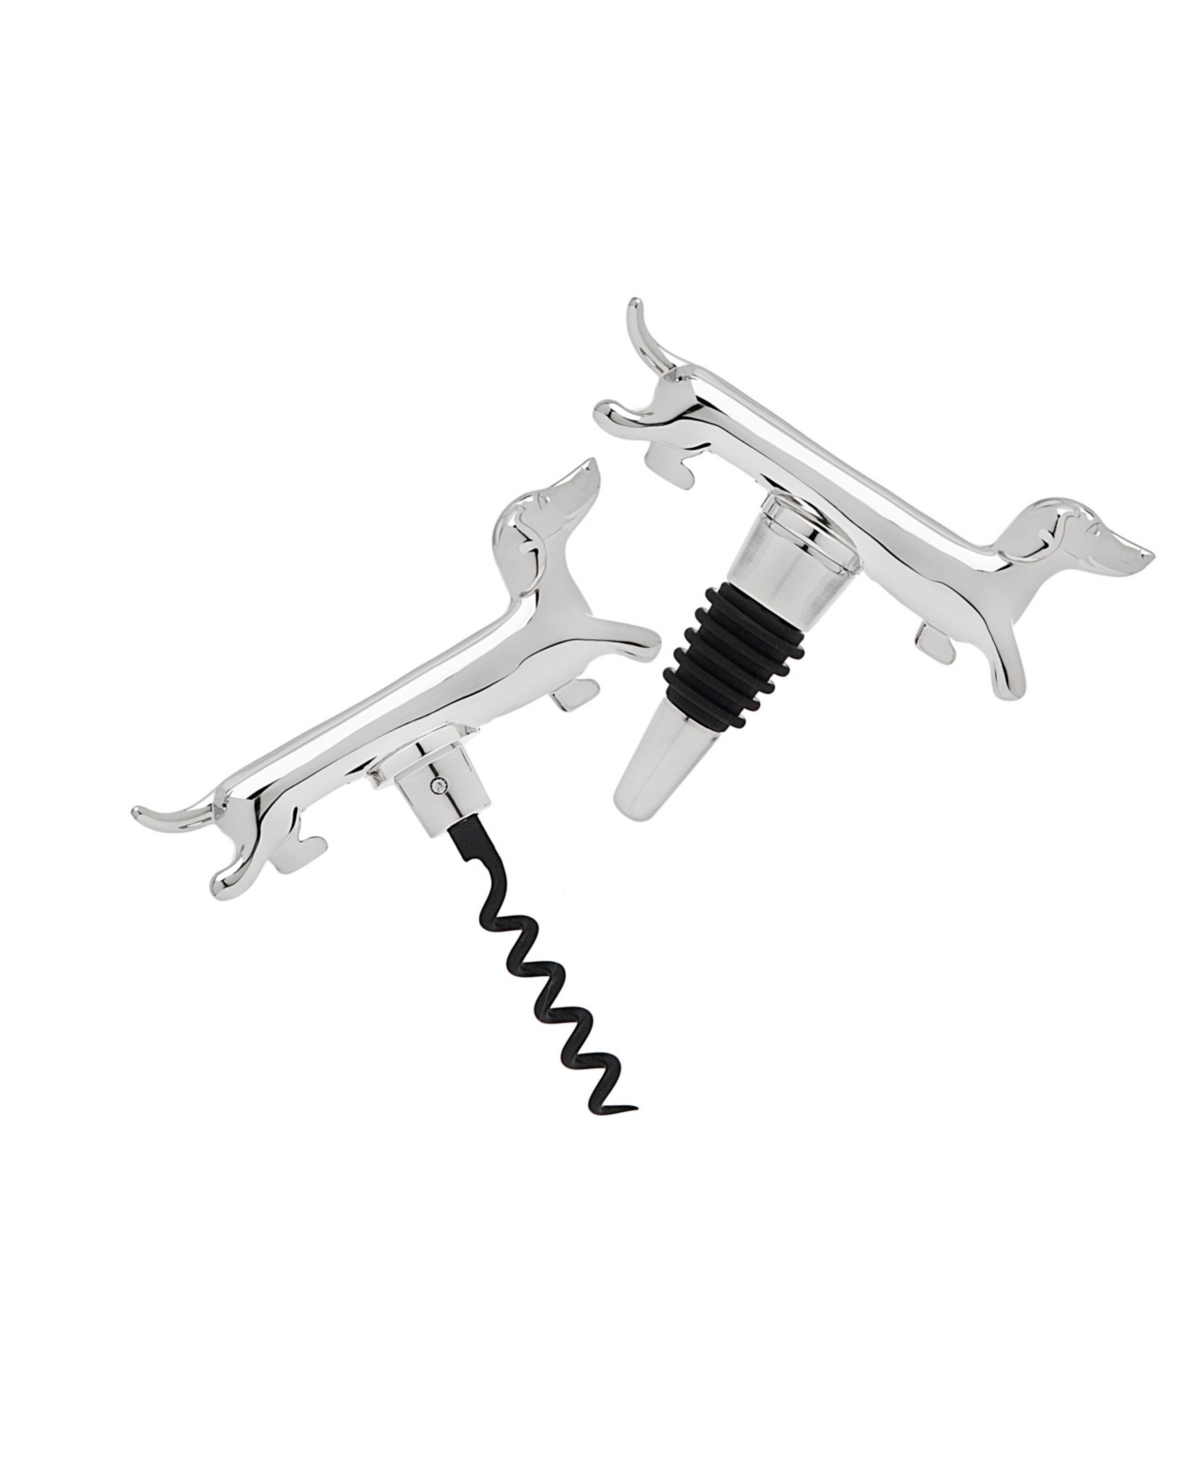 Godinger The Dachshund Bottle Stopper And Corkscrew Is The Perfect For The Wine Connoisseur In Silver